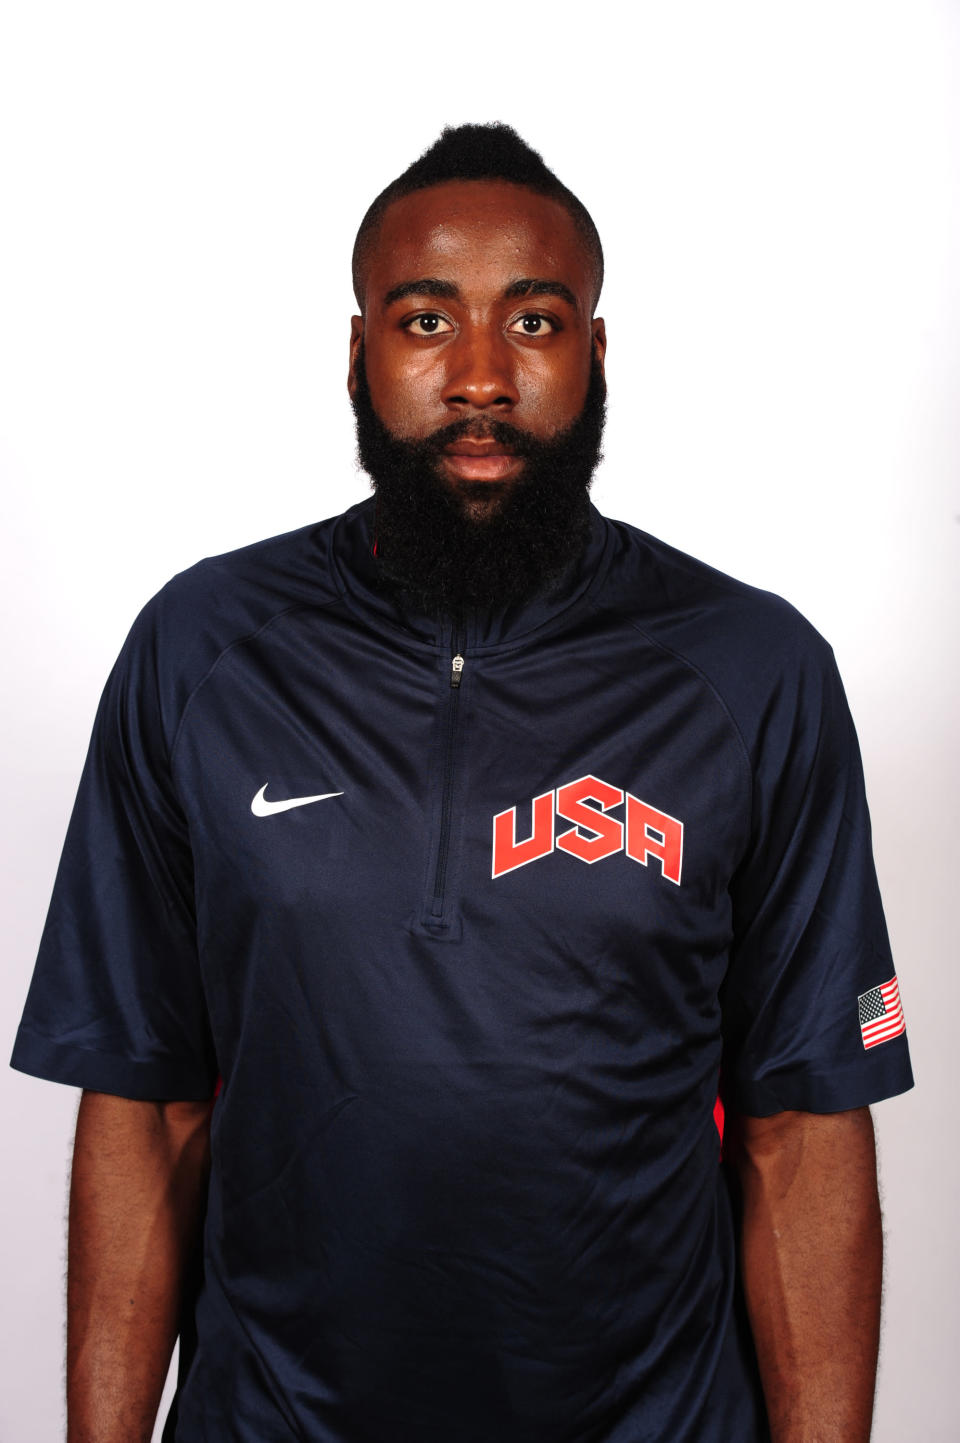 James Harden, the 2012 NBA Sixth Man of the Year, will be joining Oklahoma City Thunder teammates Kevin Durant and Russell Westbrook on the 2012 USA Basketball Men's National Team. (Photo by Andrew D. Bernstein/NBAE via Getty Images)